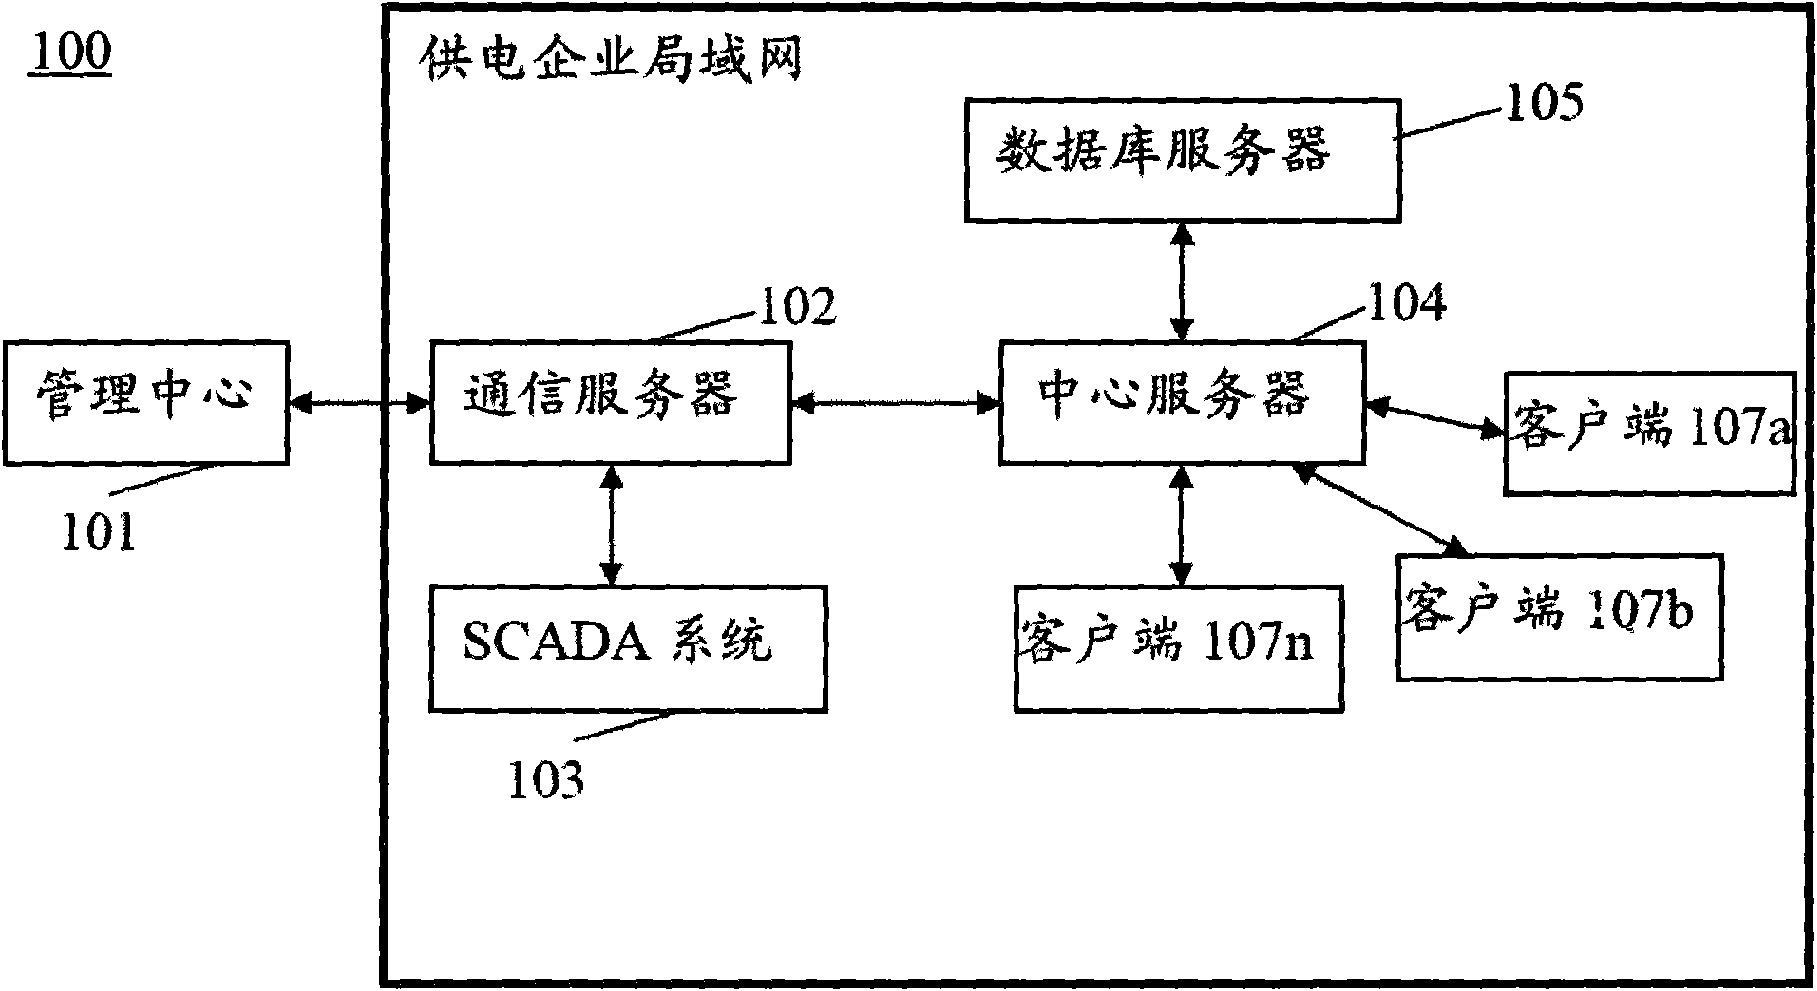 Method for monitoring and managing electrical energy quality of electric distribution network